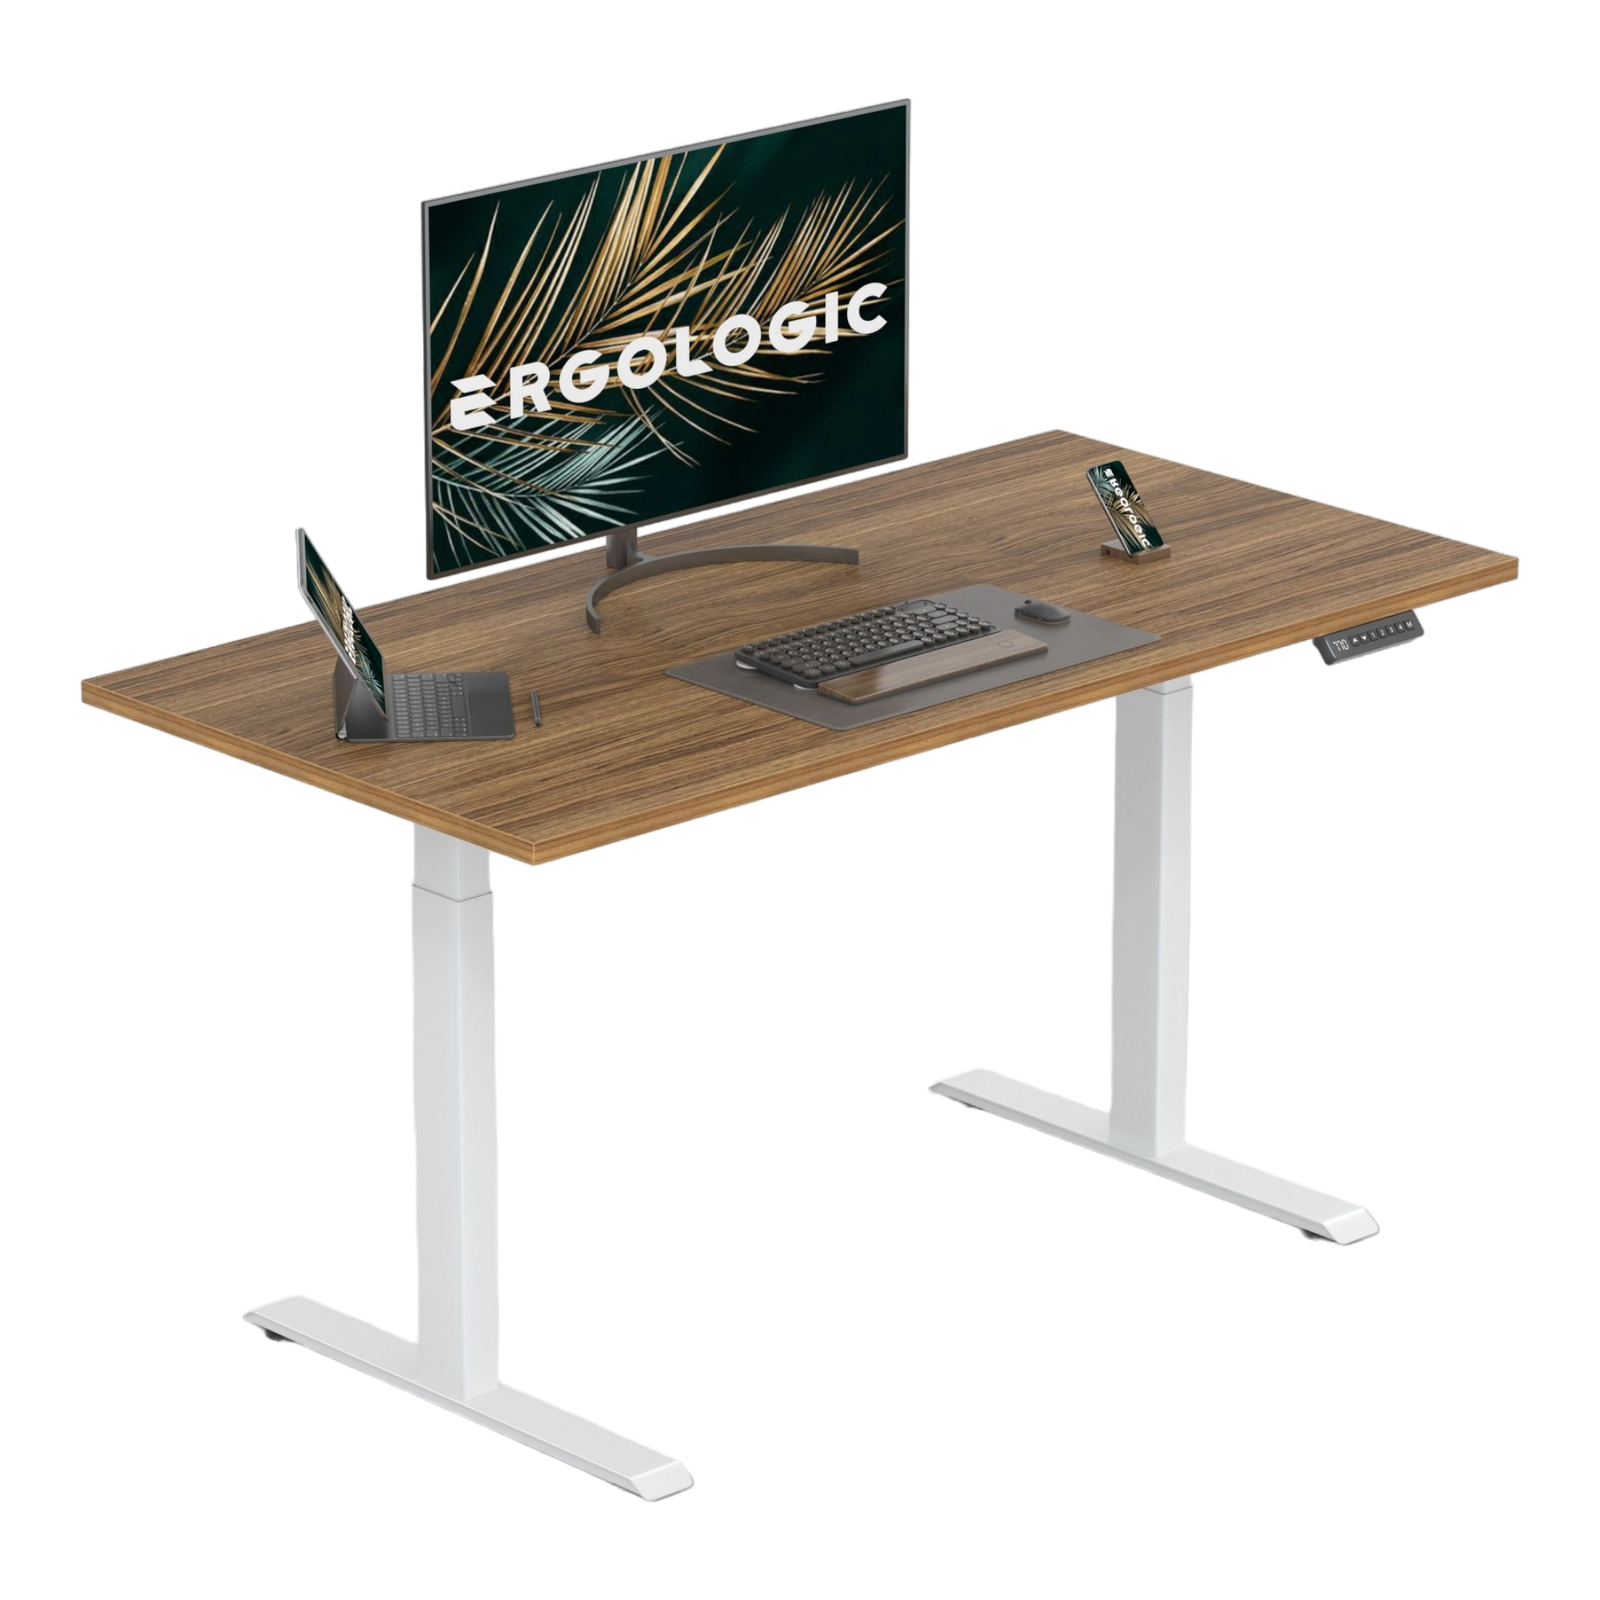 EL001-SWR-P-DO-1200X600 Ergologic Dual Motor 2 Stage White Color Desk Electric Height Standing Adjustable Desk Frame Two Stage office motorized Table Premium Quality